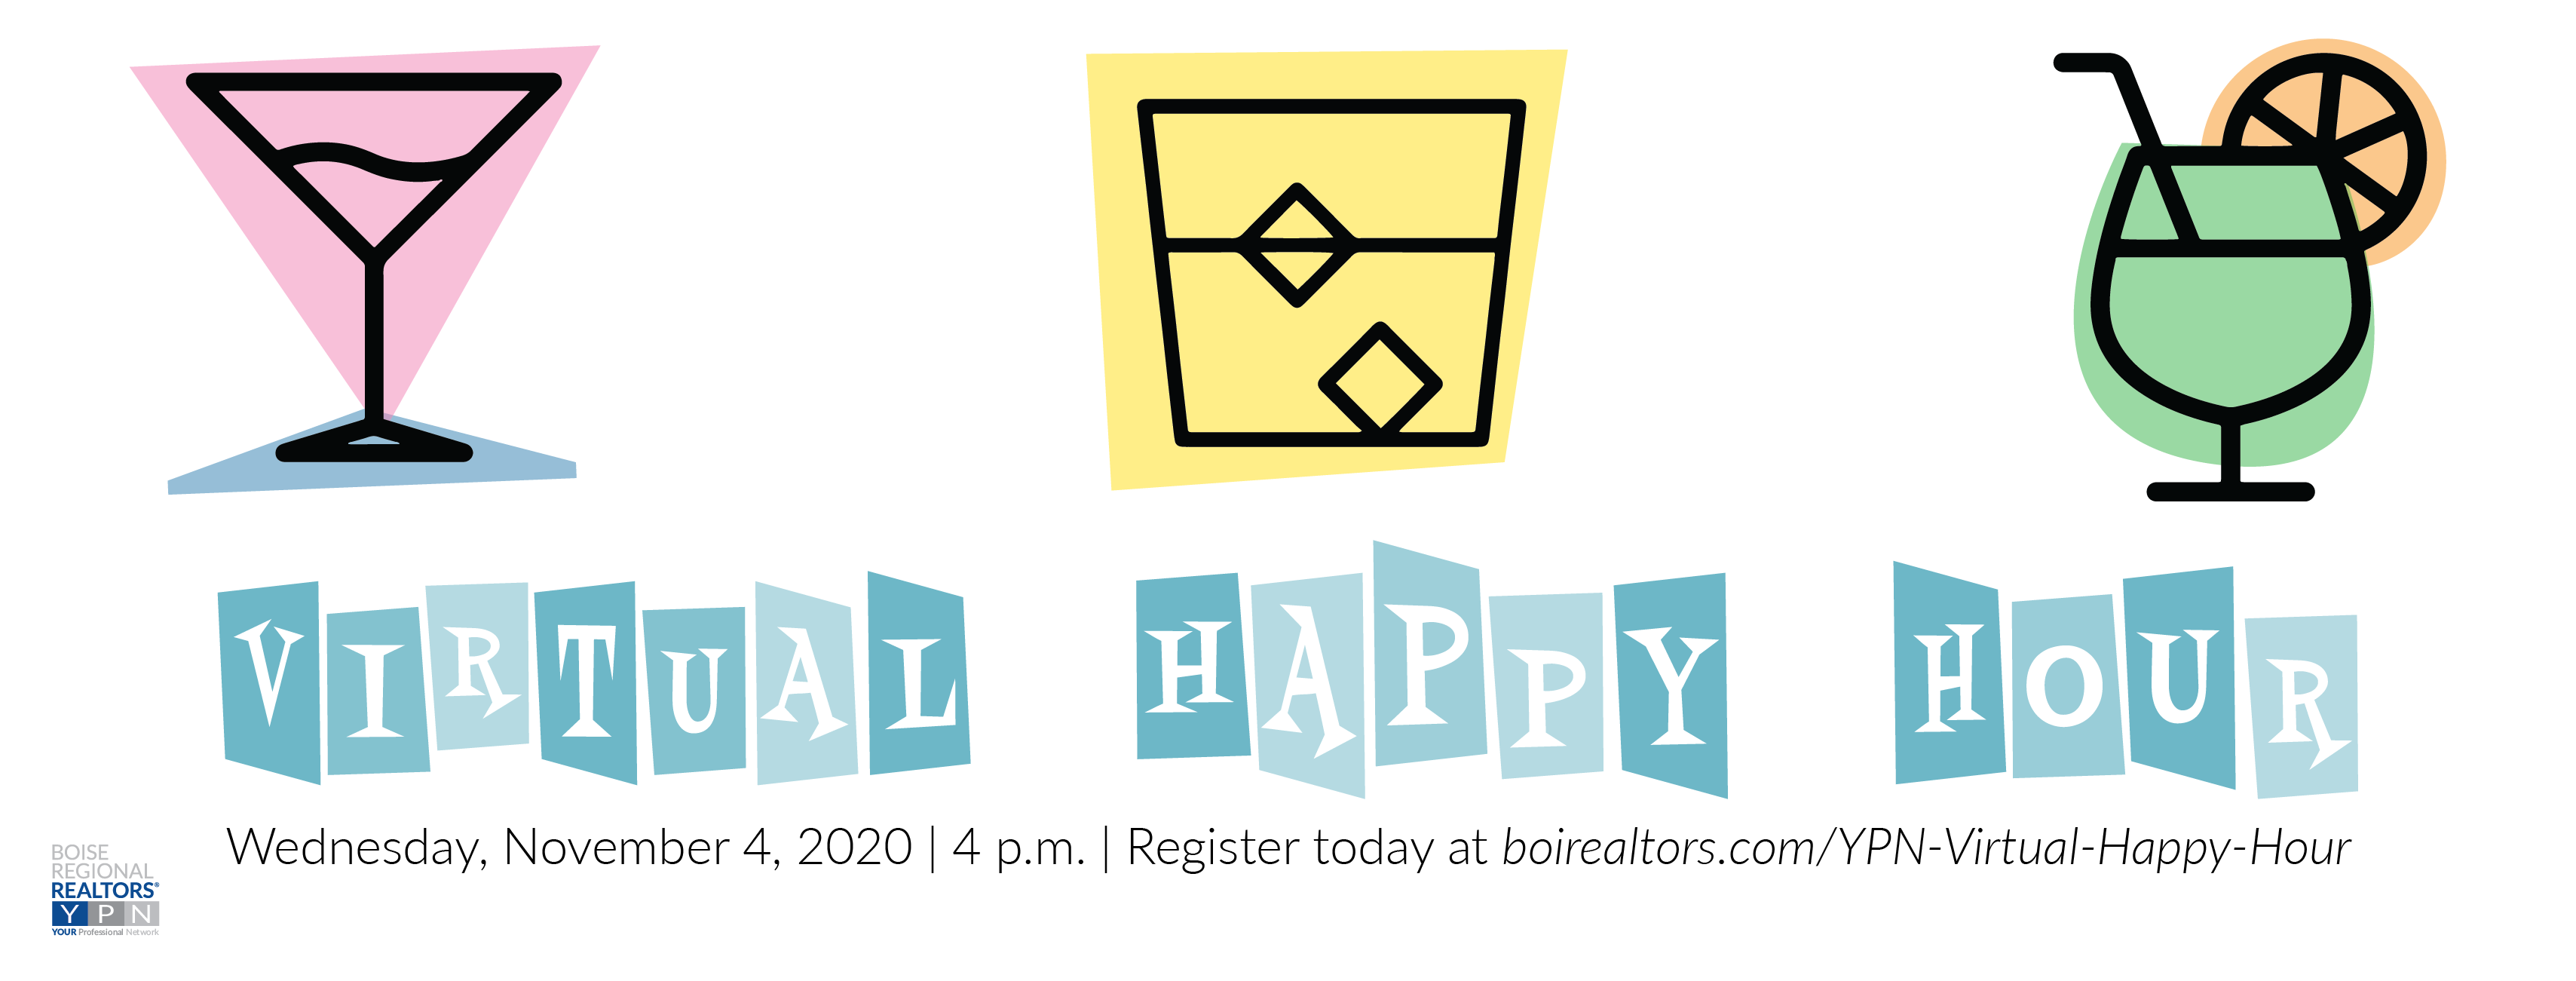 Register today for YPN's Virtual Happy Hour on November 4th, 2020